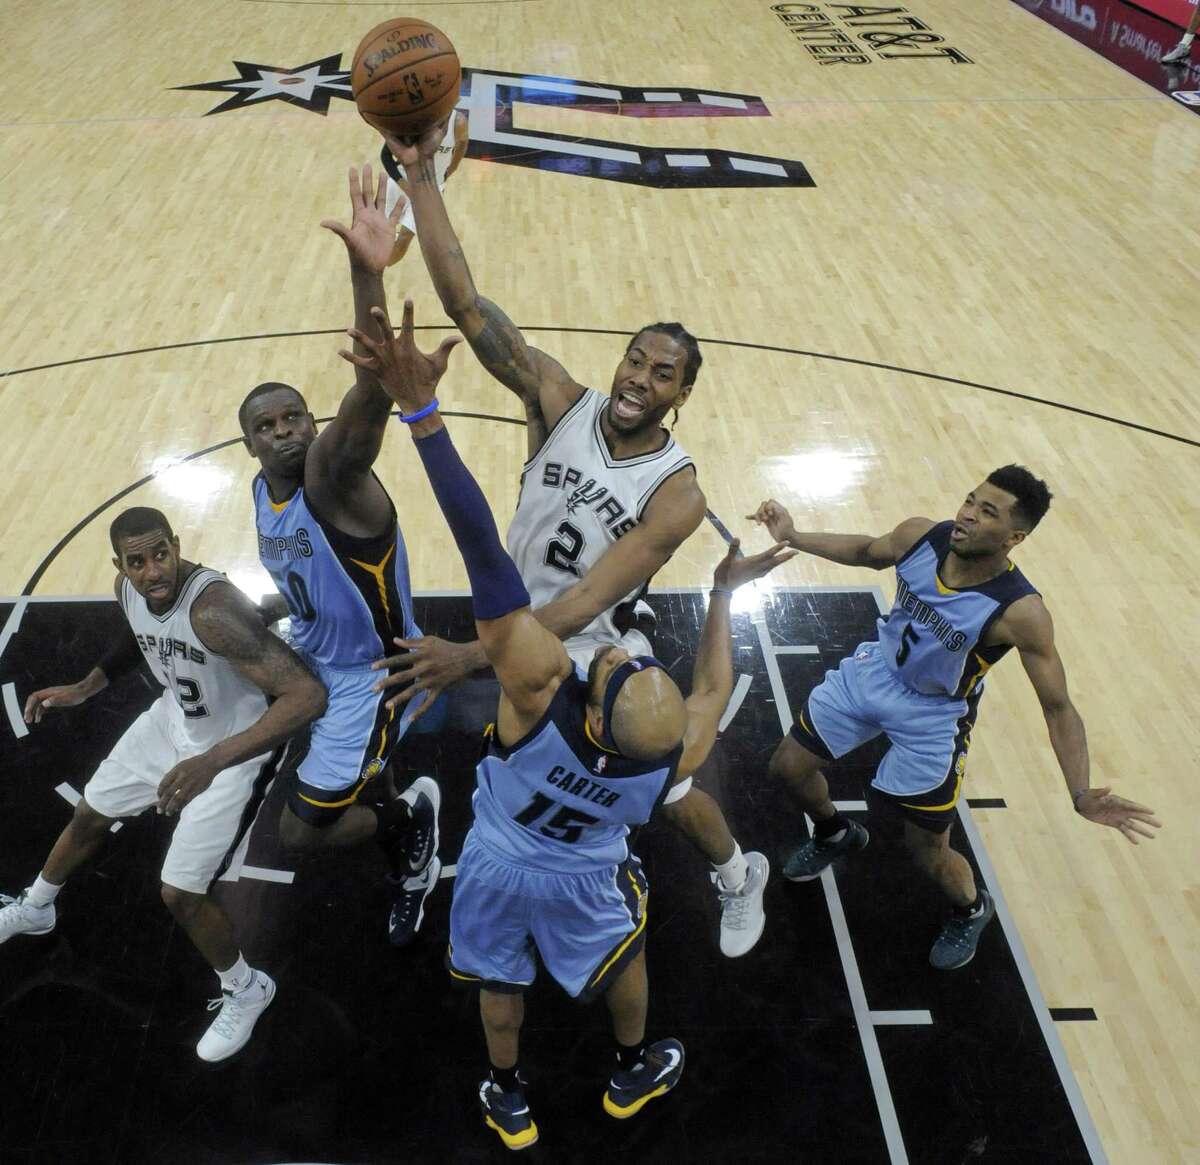 San Antonio Spurs' Kawhi Leonard shoots over Memphis Grizzlies?• Zach Randolph and Vince Carter during second half action of Game 2 in the first round of the Western Conference playoffs held Monday April 17, 2017 at the AT&T Center. The Spurs won 96-82.